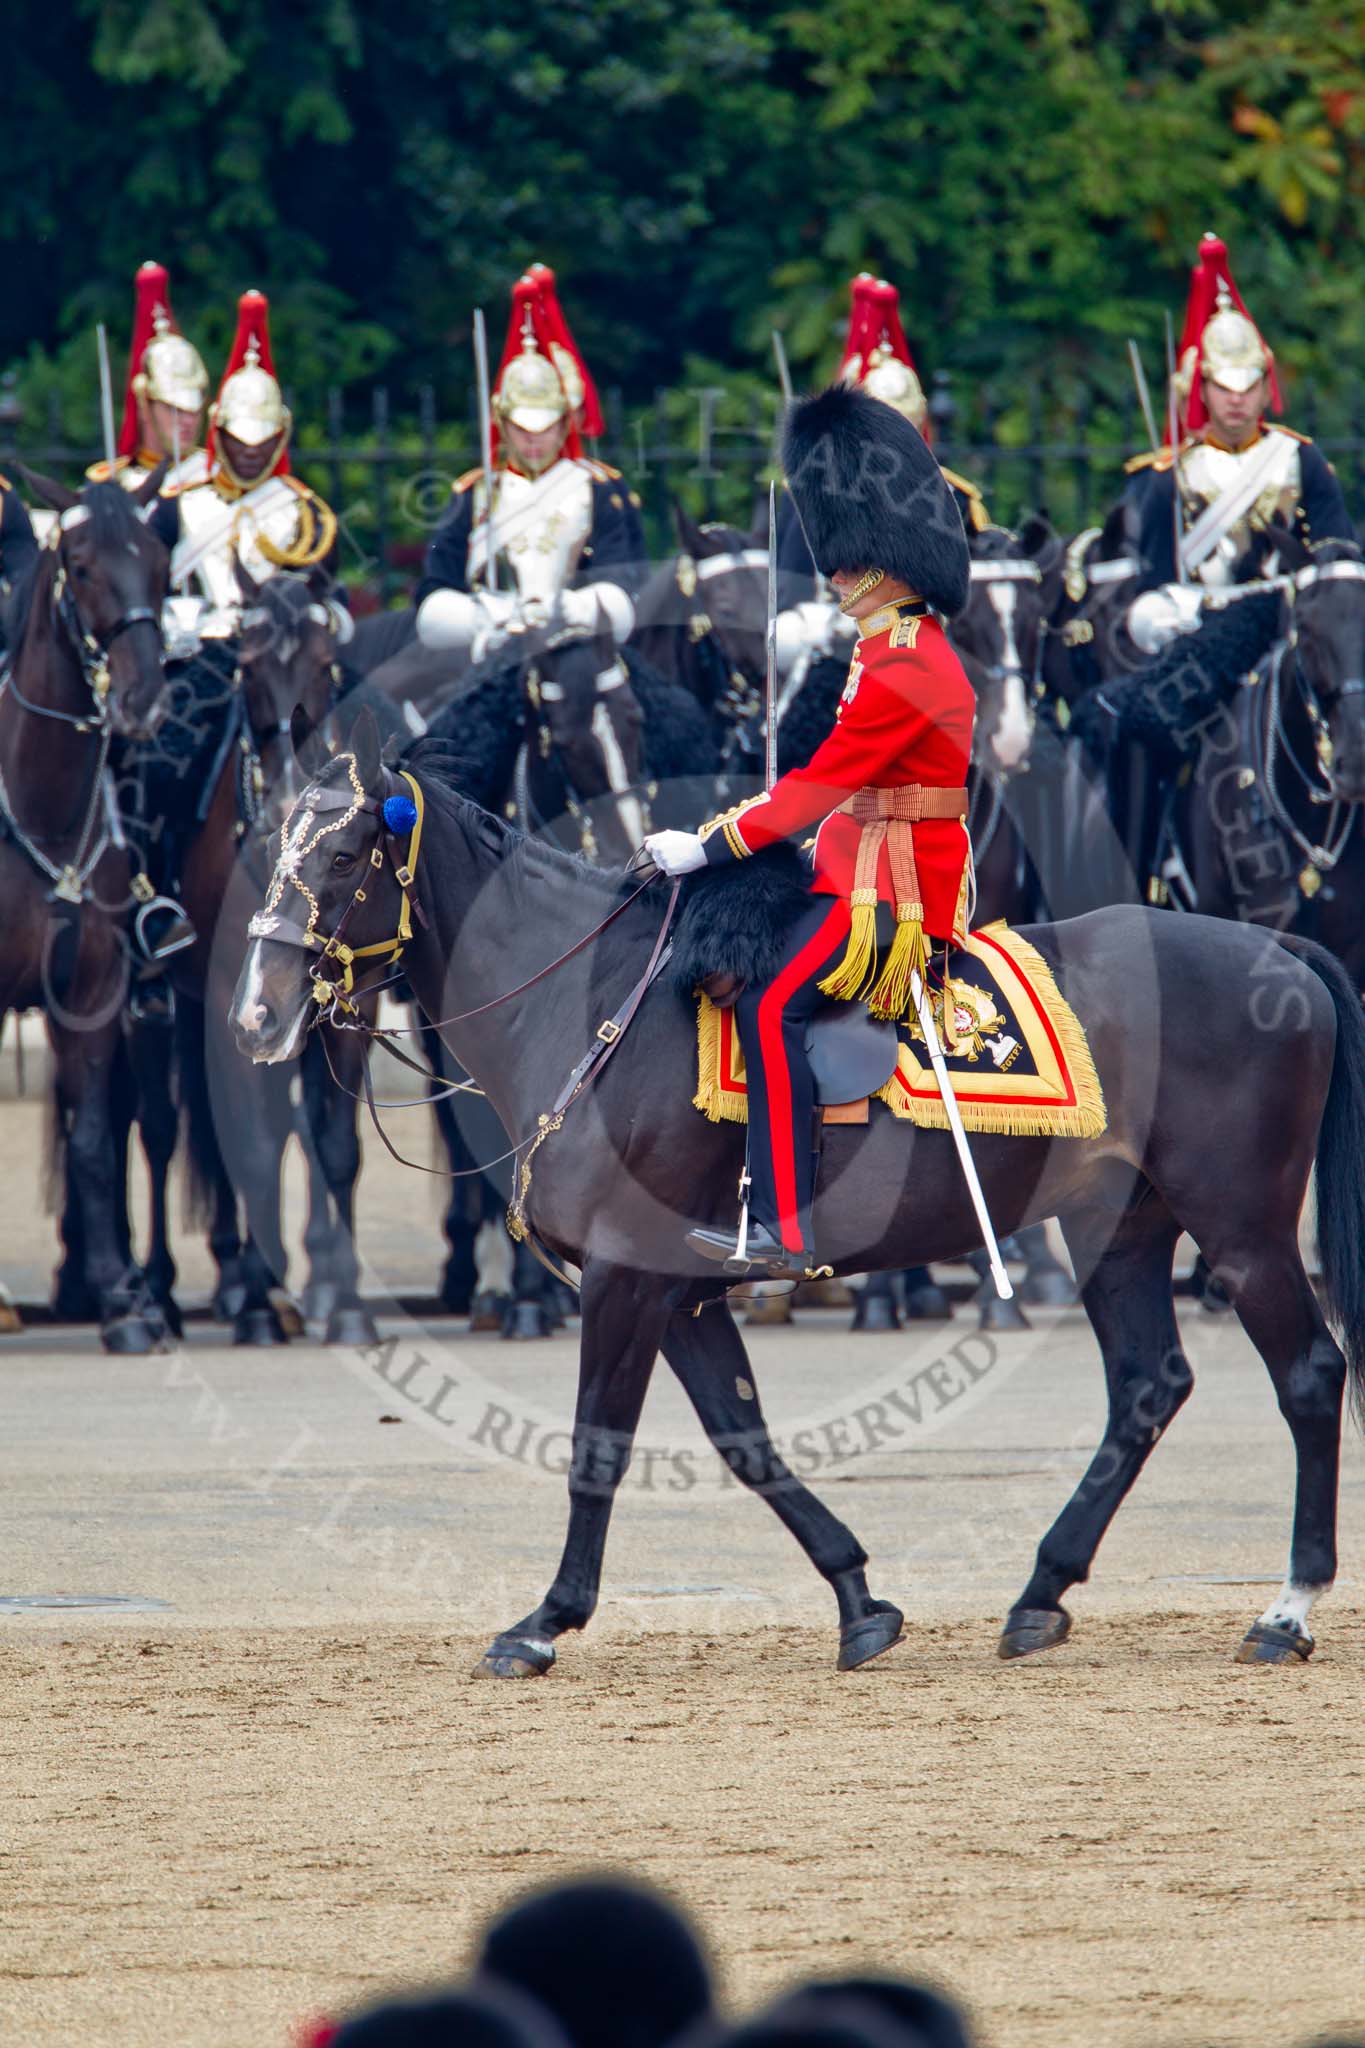 Trooping the Colour 2011: The Adjutant of the Parade, Captain Hamish Barne, 1st Battalion Scots Guards, Adjutant of the 1st Battalion Scots Guards, during the March Past..
Horse Guards Parade, Westminster,
London SW1,
Greater London,
United Kingdom,
on 11 June 2011 at 11:44, image #286